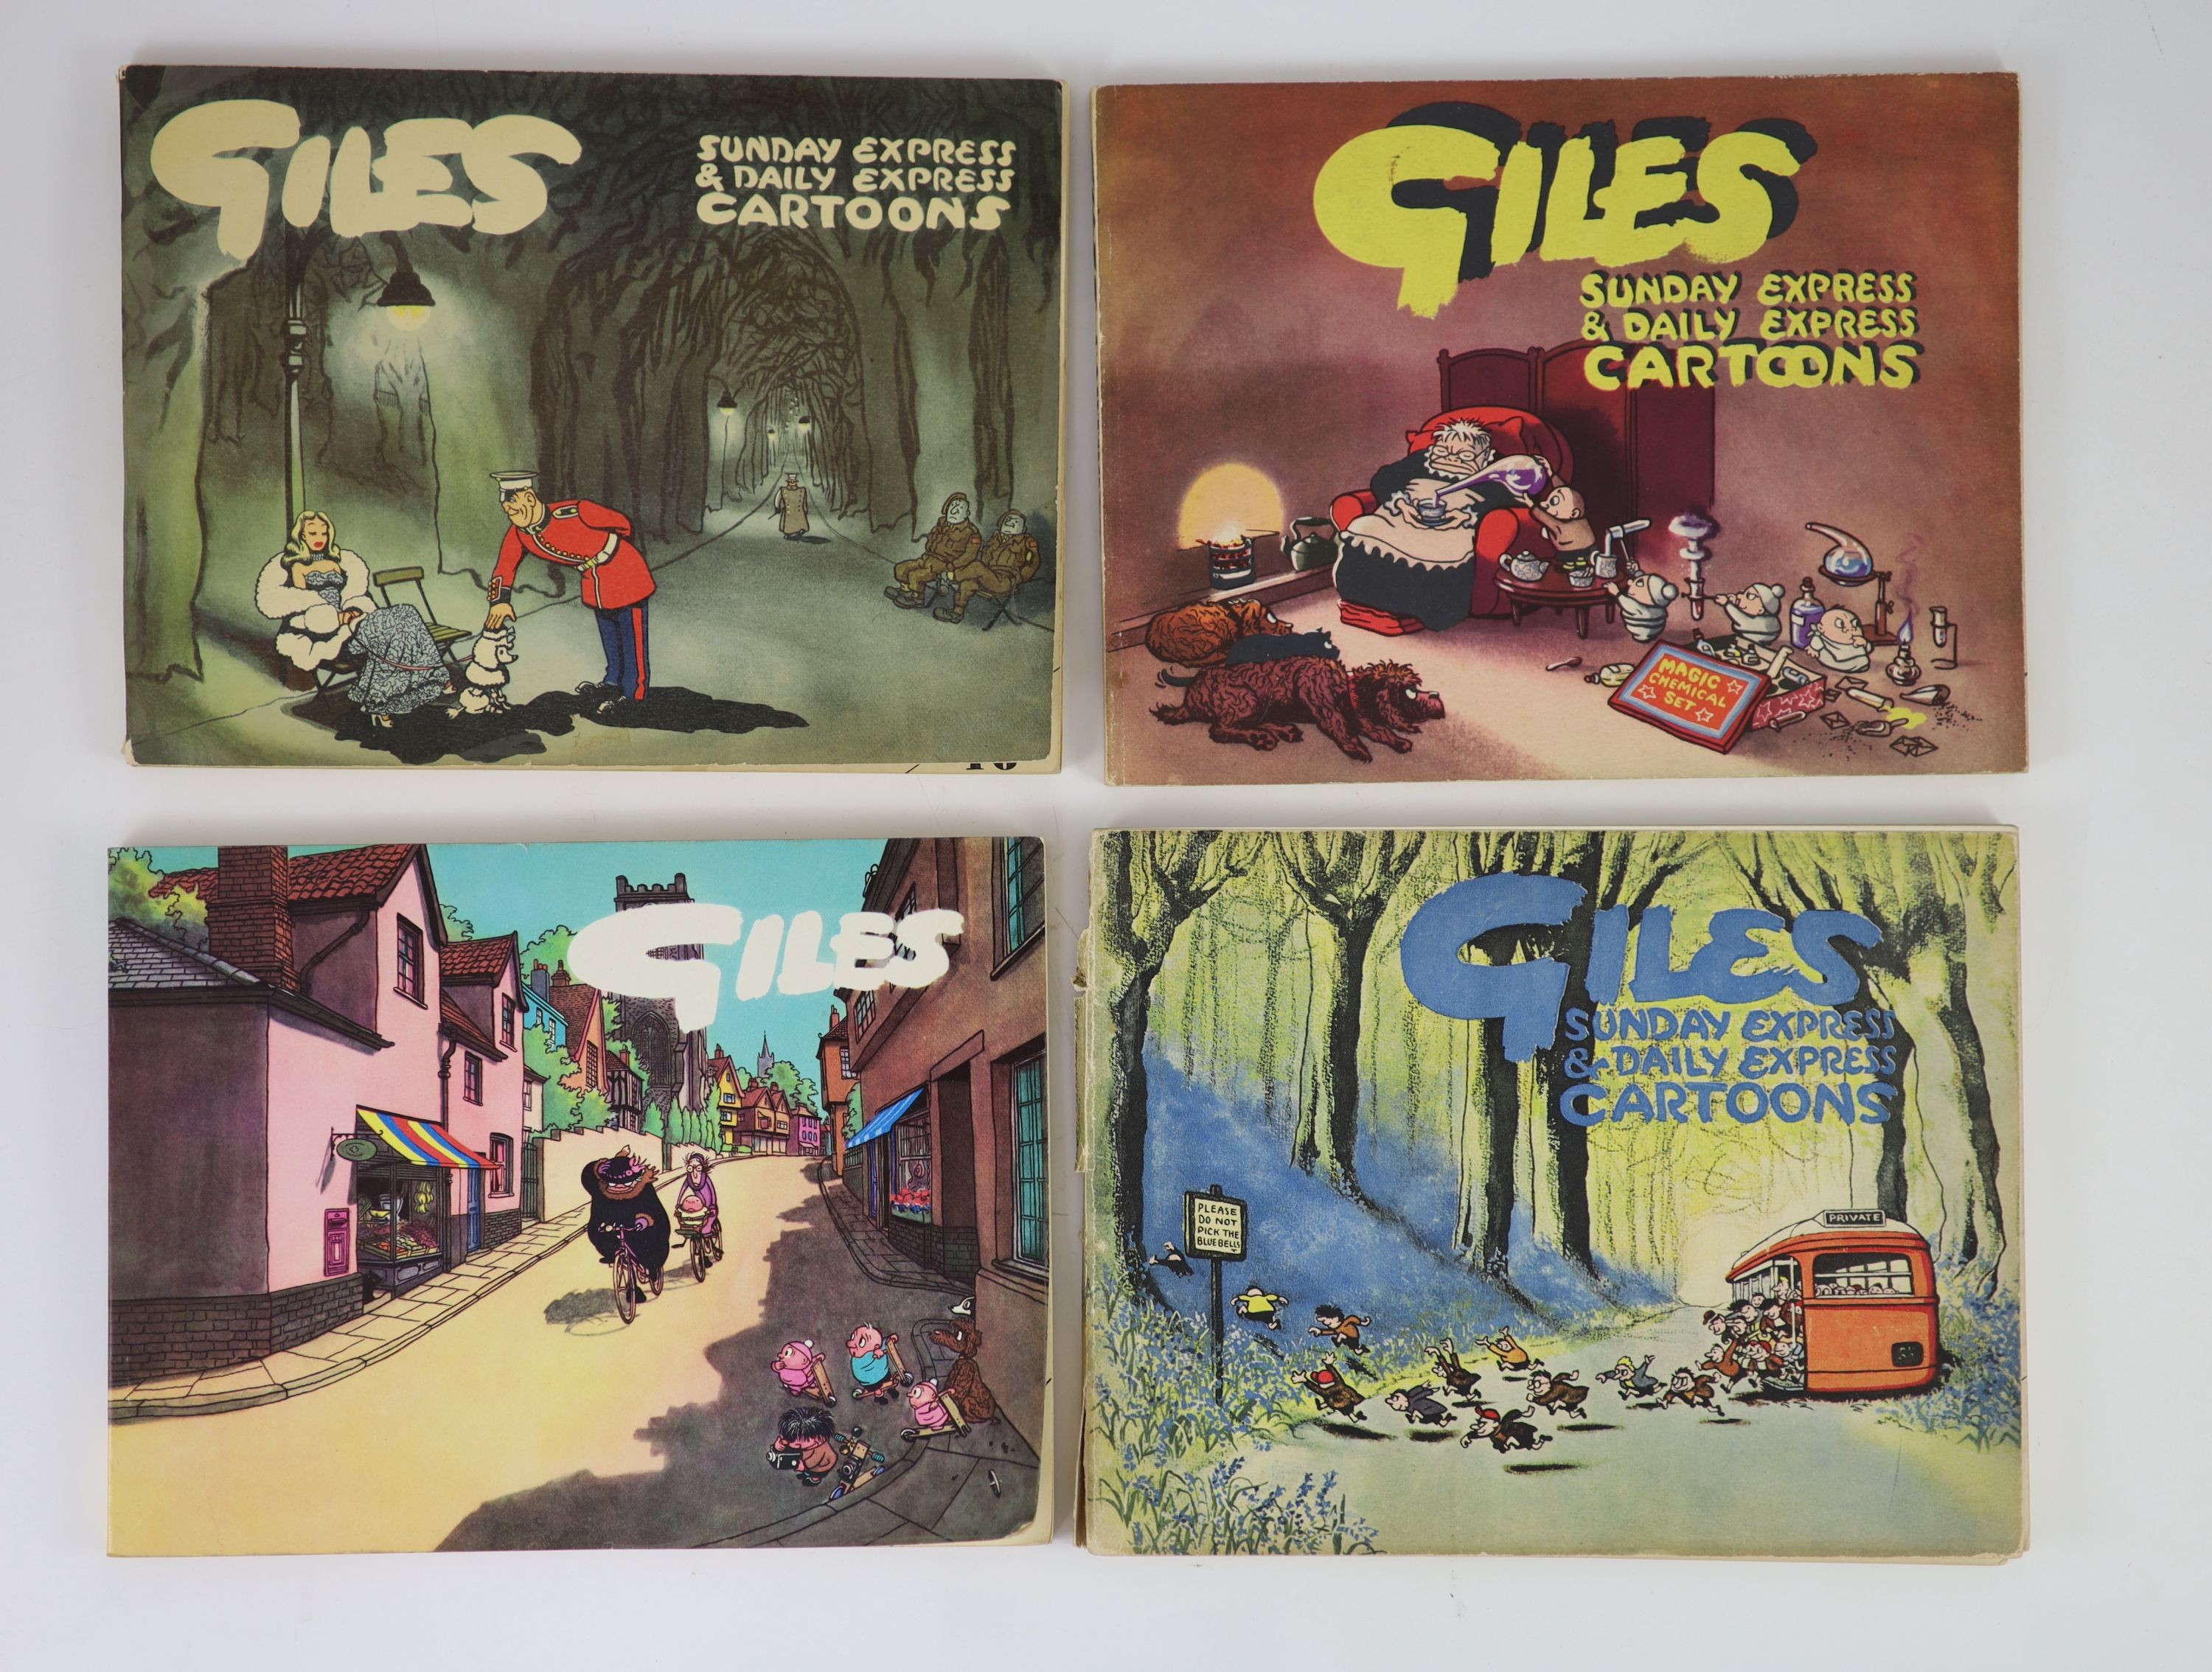 Giles, Carl - A rare complete set of Daily Express and Sunday Express Cartoons, 1st-49th series, with commemorative issues 50-52, 56 and 57, together with - Tory, Peter - Giles: A Life in Cartoons, London, 1992 (2 copies